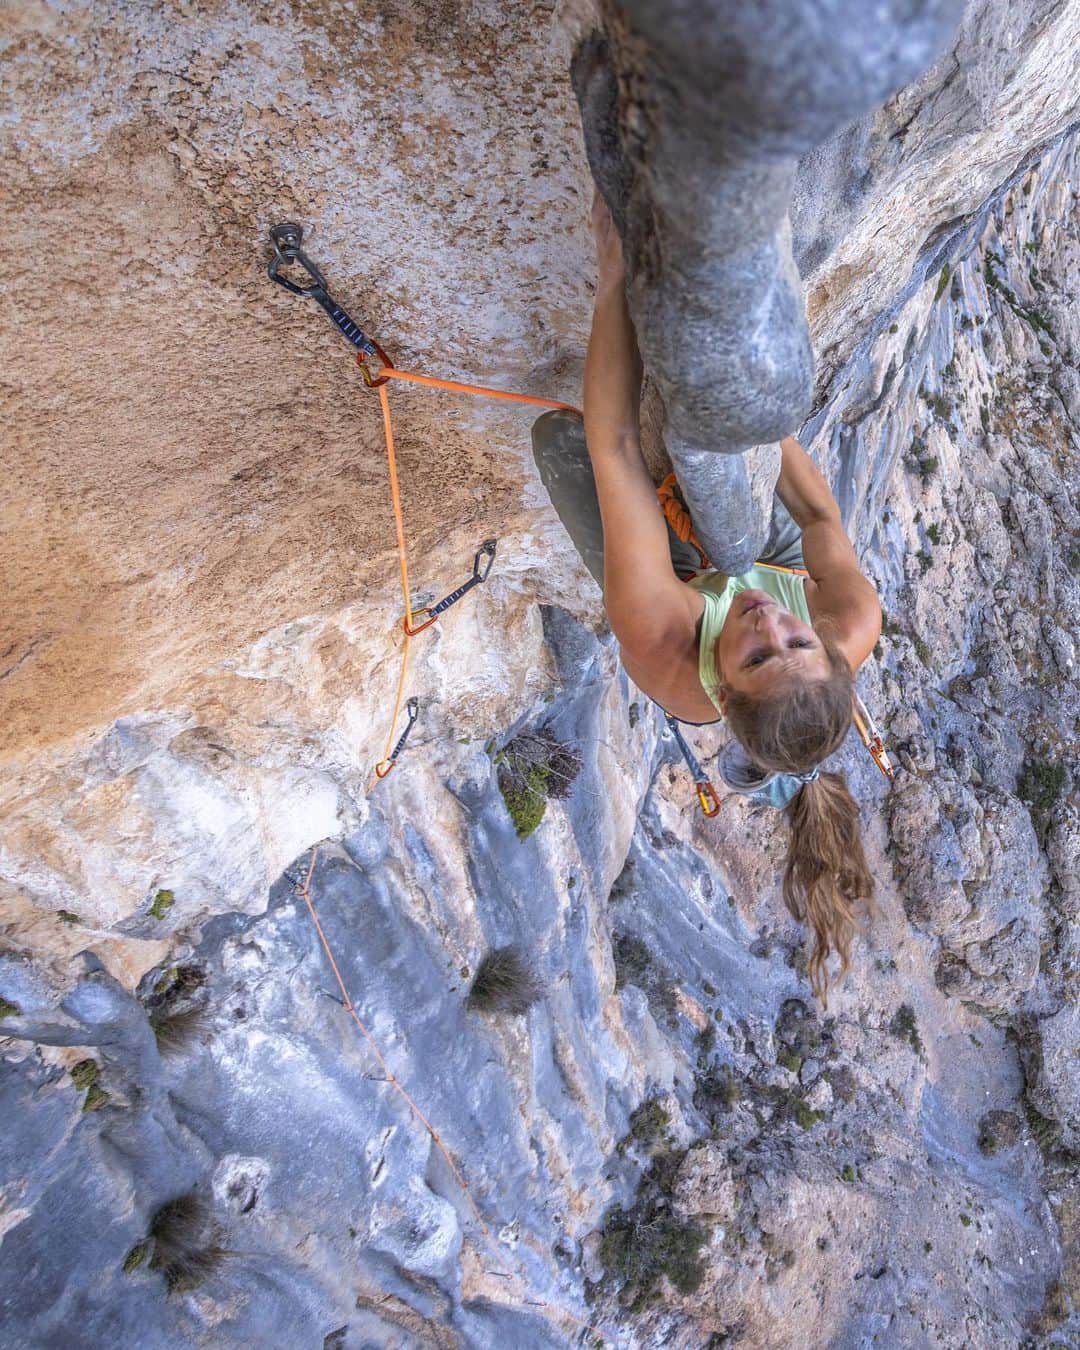 シャーロット・デュリフさんのインスタグラム写真 - (シャーロット・デュリフInstagram)「700 and counting, 8a+, Kyparissi, Greece   I bolted this route in December 2021 while @joshlrsn @dannyclimbs7 and I had an awesome but rainy trip so we couldn’t really climb. We were bolting in a new sector and I noticed this big tuffa way up above ground, sticking out of a prow feature in the overhang…  I couldn’t resist and bolted it ground up. Sadly, it was wet, and limestone (especially tuffas!) get fragile when it’s soaked up with rain, so I didn’t get to climb in it then.  When we returned in summer 2022 for our wedding, I obviously really wanted to climb it (amongst other undone projects we had bolted), but in parallel I also had my 2022 goal to achieve : climb 17 routes 8a or harder, so I would reach the anecdotic number of 700 throughout my career. When we got to Greece, I had 3 left, and I paced myself to make the 700th special. You guessed it, I picked that big tuffa line to be my project for the 700th. I didn’t know the grade, nor the moves, and I still had to clean it. After two days working on it and making it ready to climb, I clipped the chains, and it was a great moment : it felt challenging enough, it’s a line I bolted during a trip with my favorite person @joshlrsn in one of the best places in the World, my dad was there to belay me, and I could now relax for my wedding happening a few days later 😂  If you haven’t seen it yet, check out the @coldhousemedia « and counting » film of this story (with cool archival footage!) on @epictv or by following the link in my bio !   Photo by @joshlrsn @coldhousemedia   @mountainhardwear @petzl_official @eb_climbing @volxholds」1月10日 4時11分 - chadurif